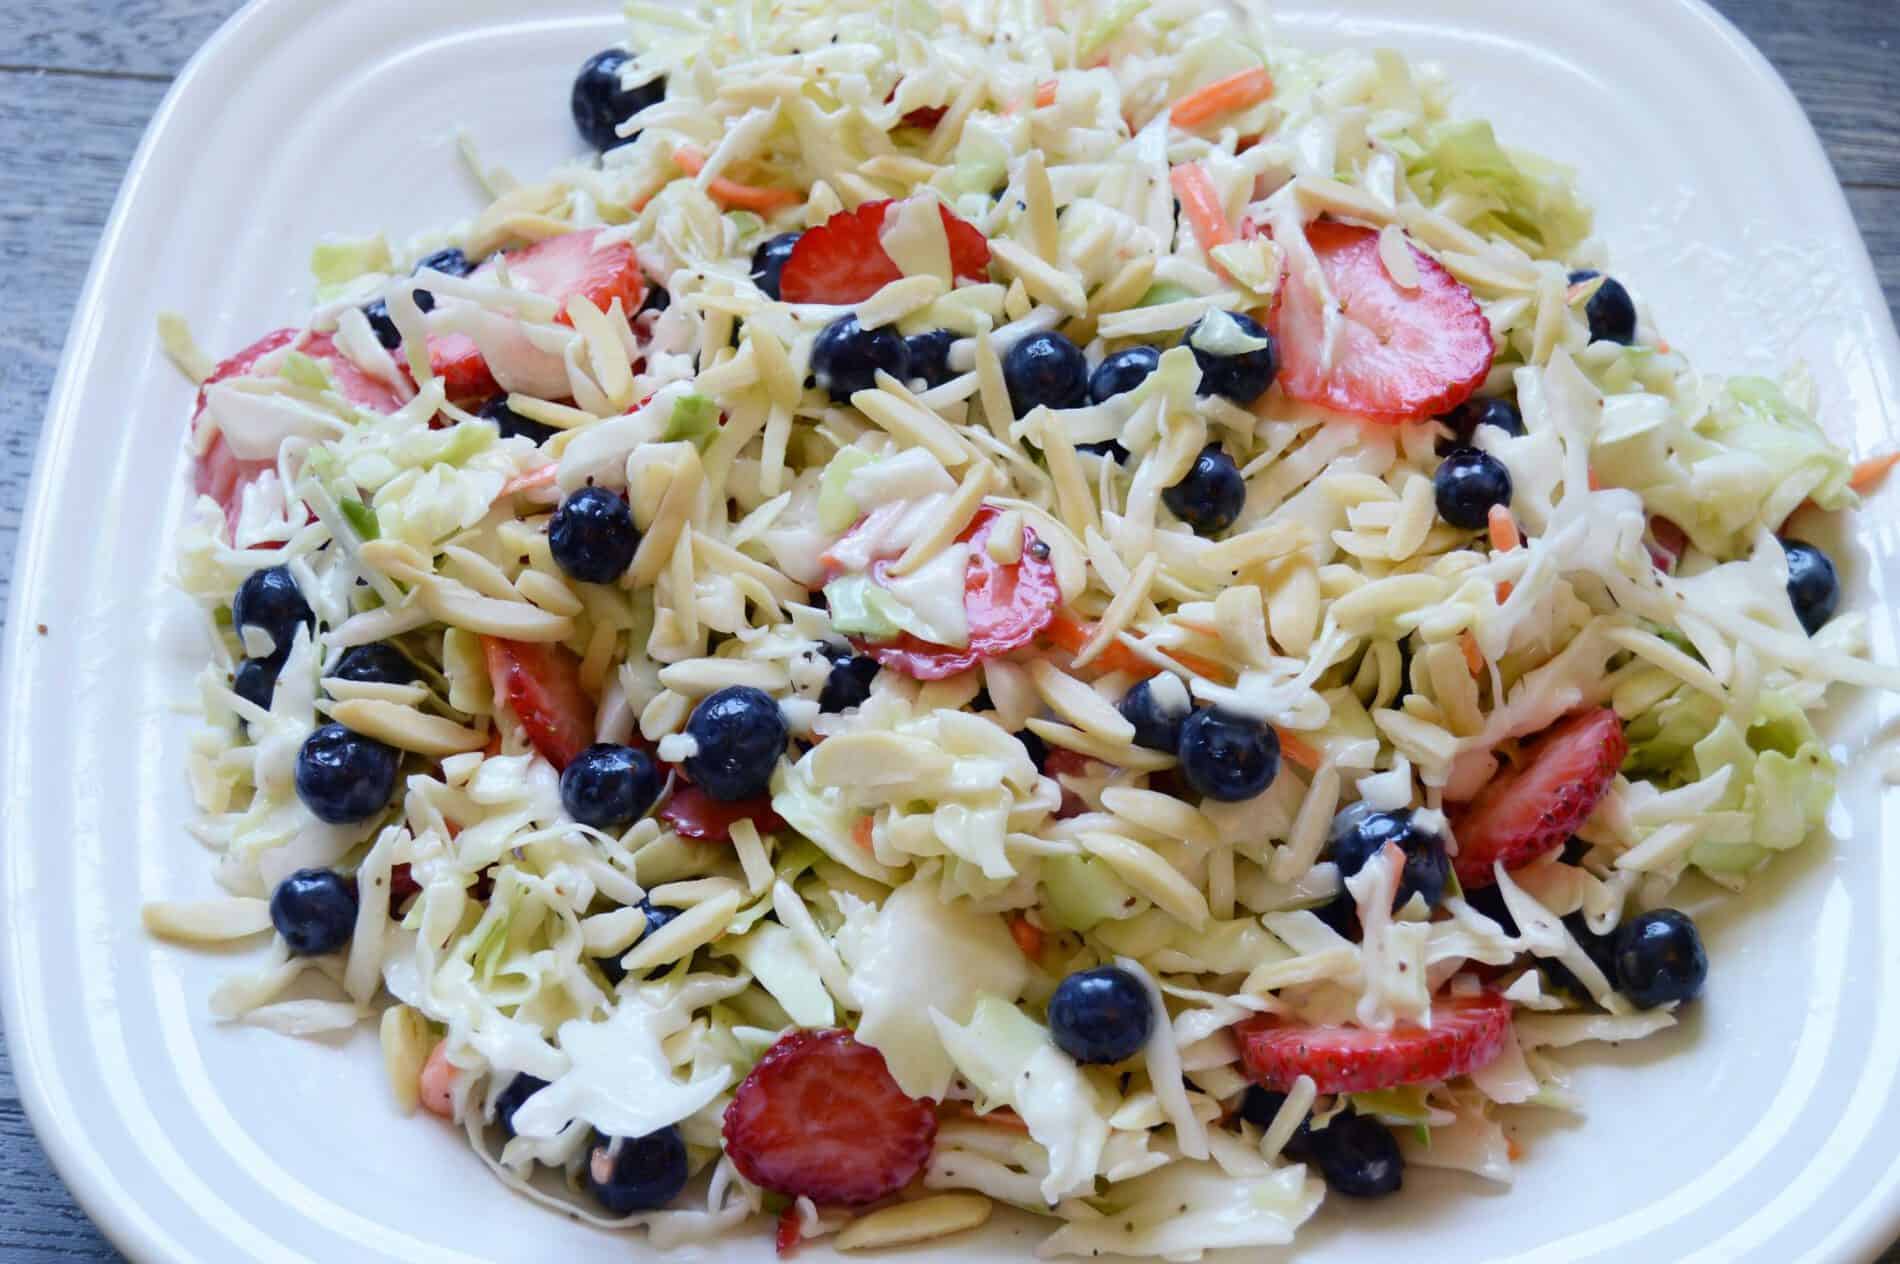 All American Slaw made with Jimmy's Cole Slaw Dressing blueberries and strawberries